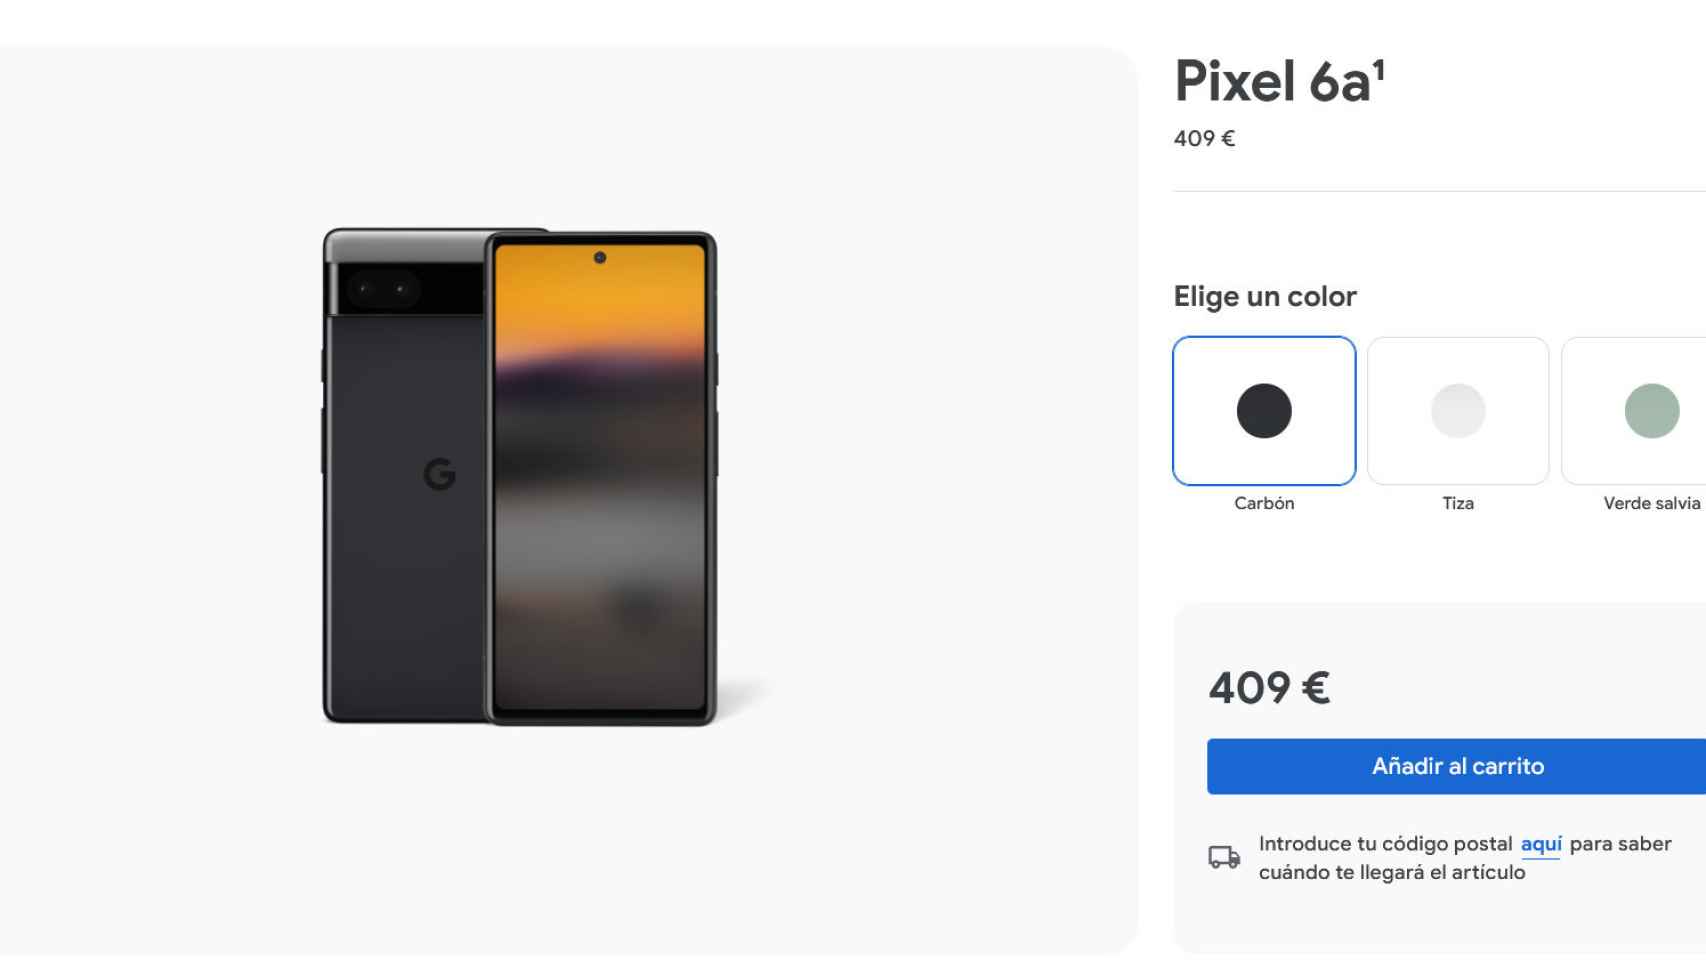 New Pixel 6a price in Europe